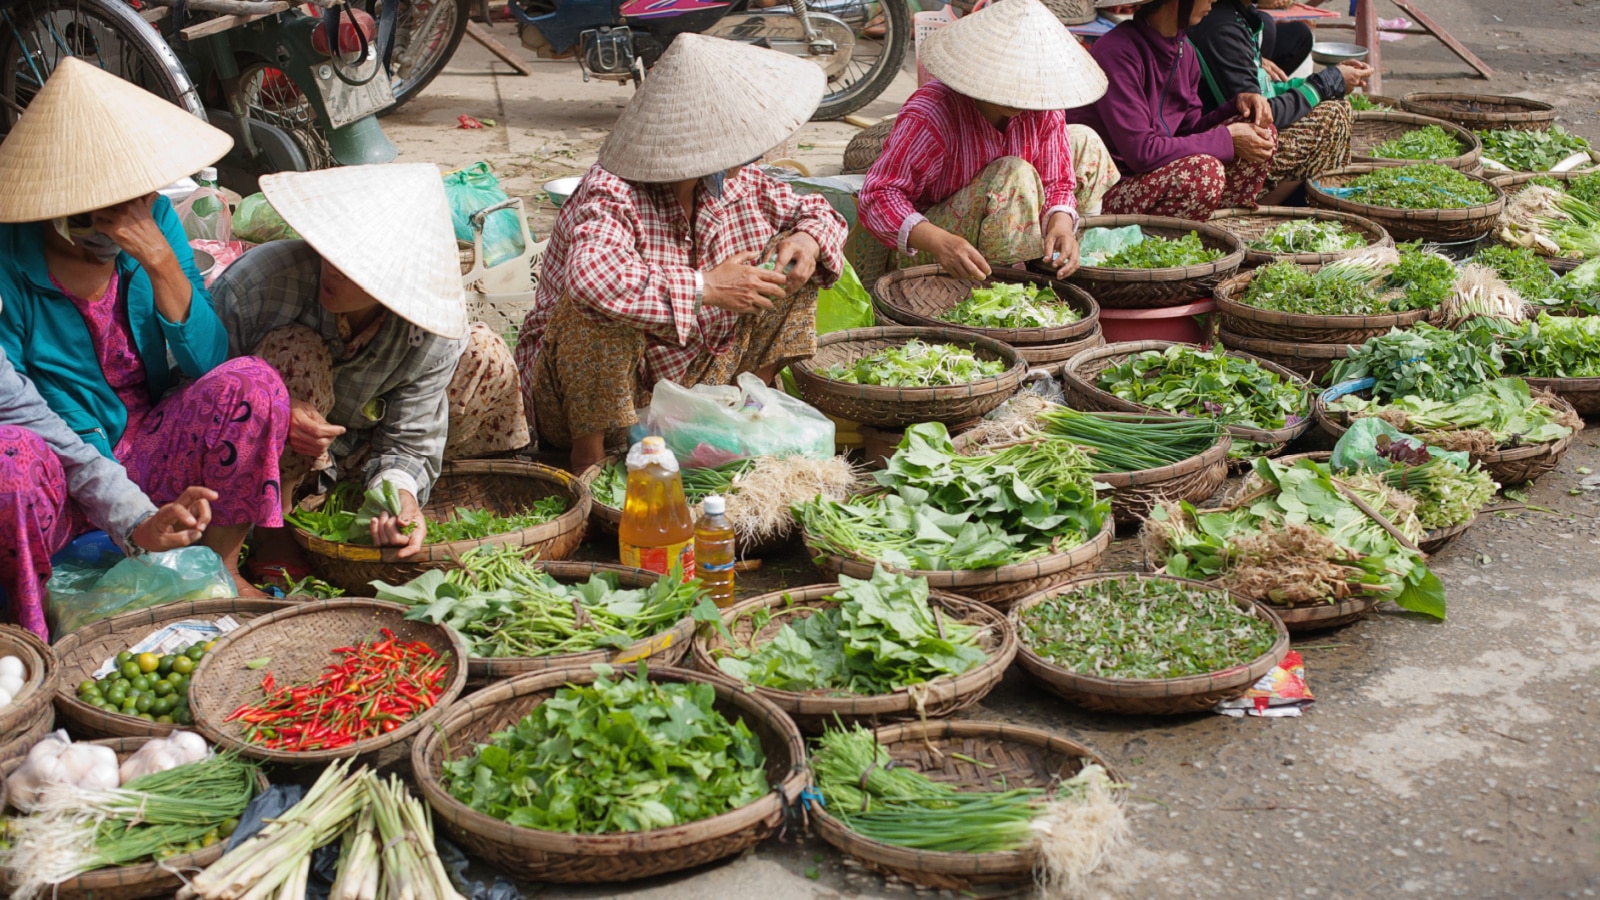 Outdoor markets in the streets of Hoi An, Vietnam